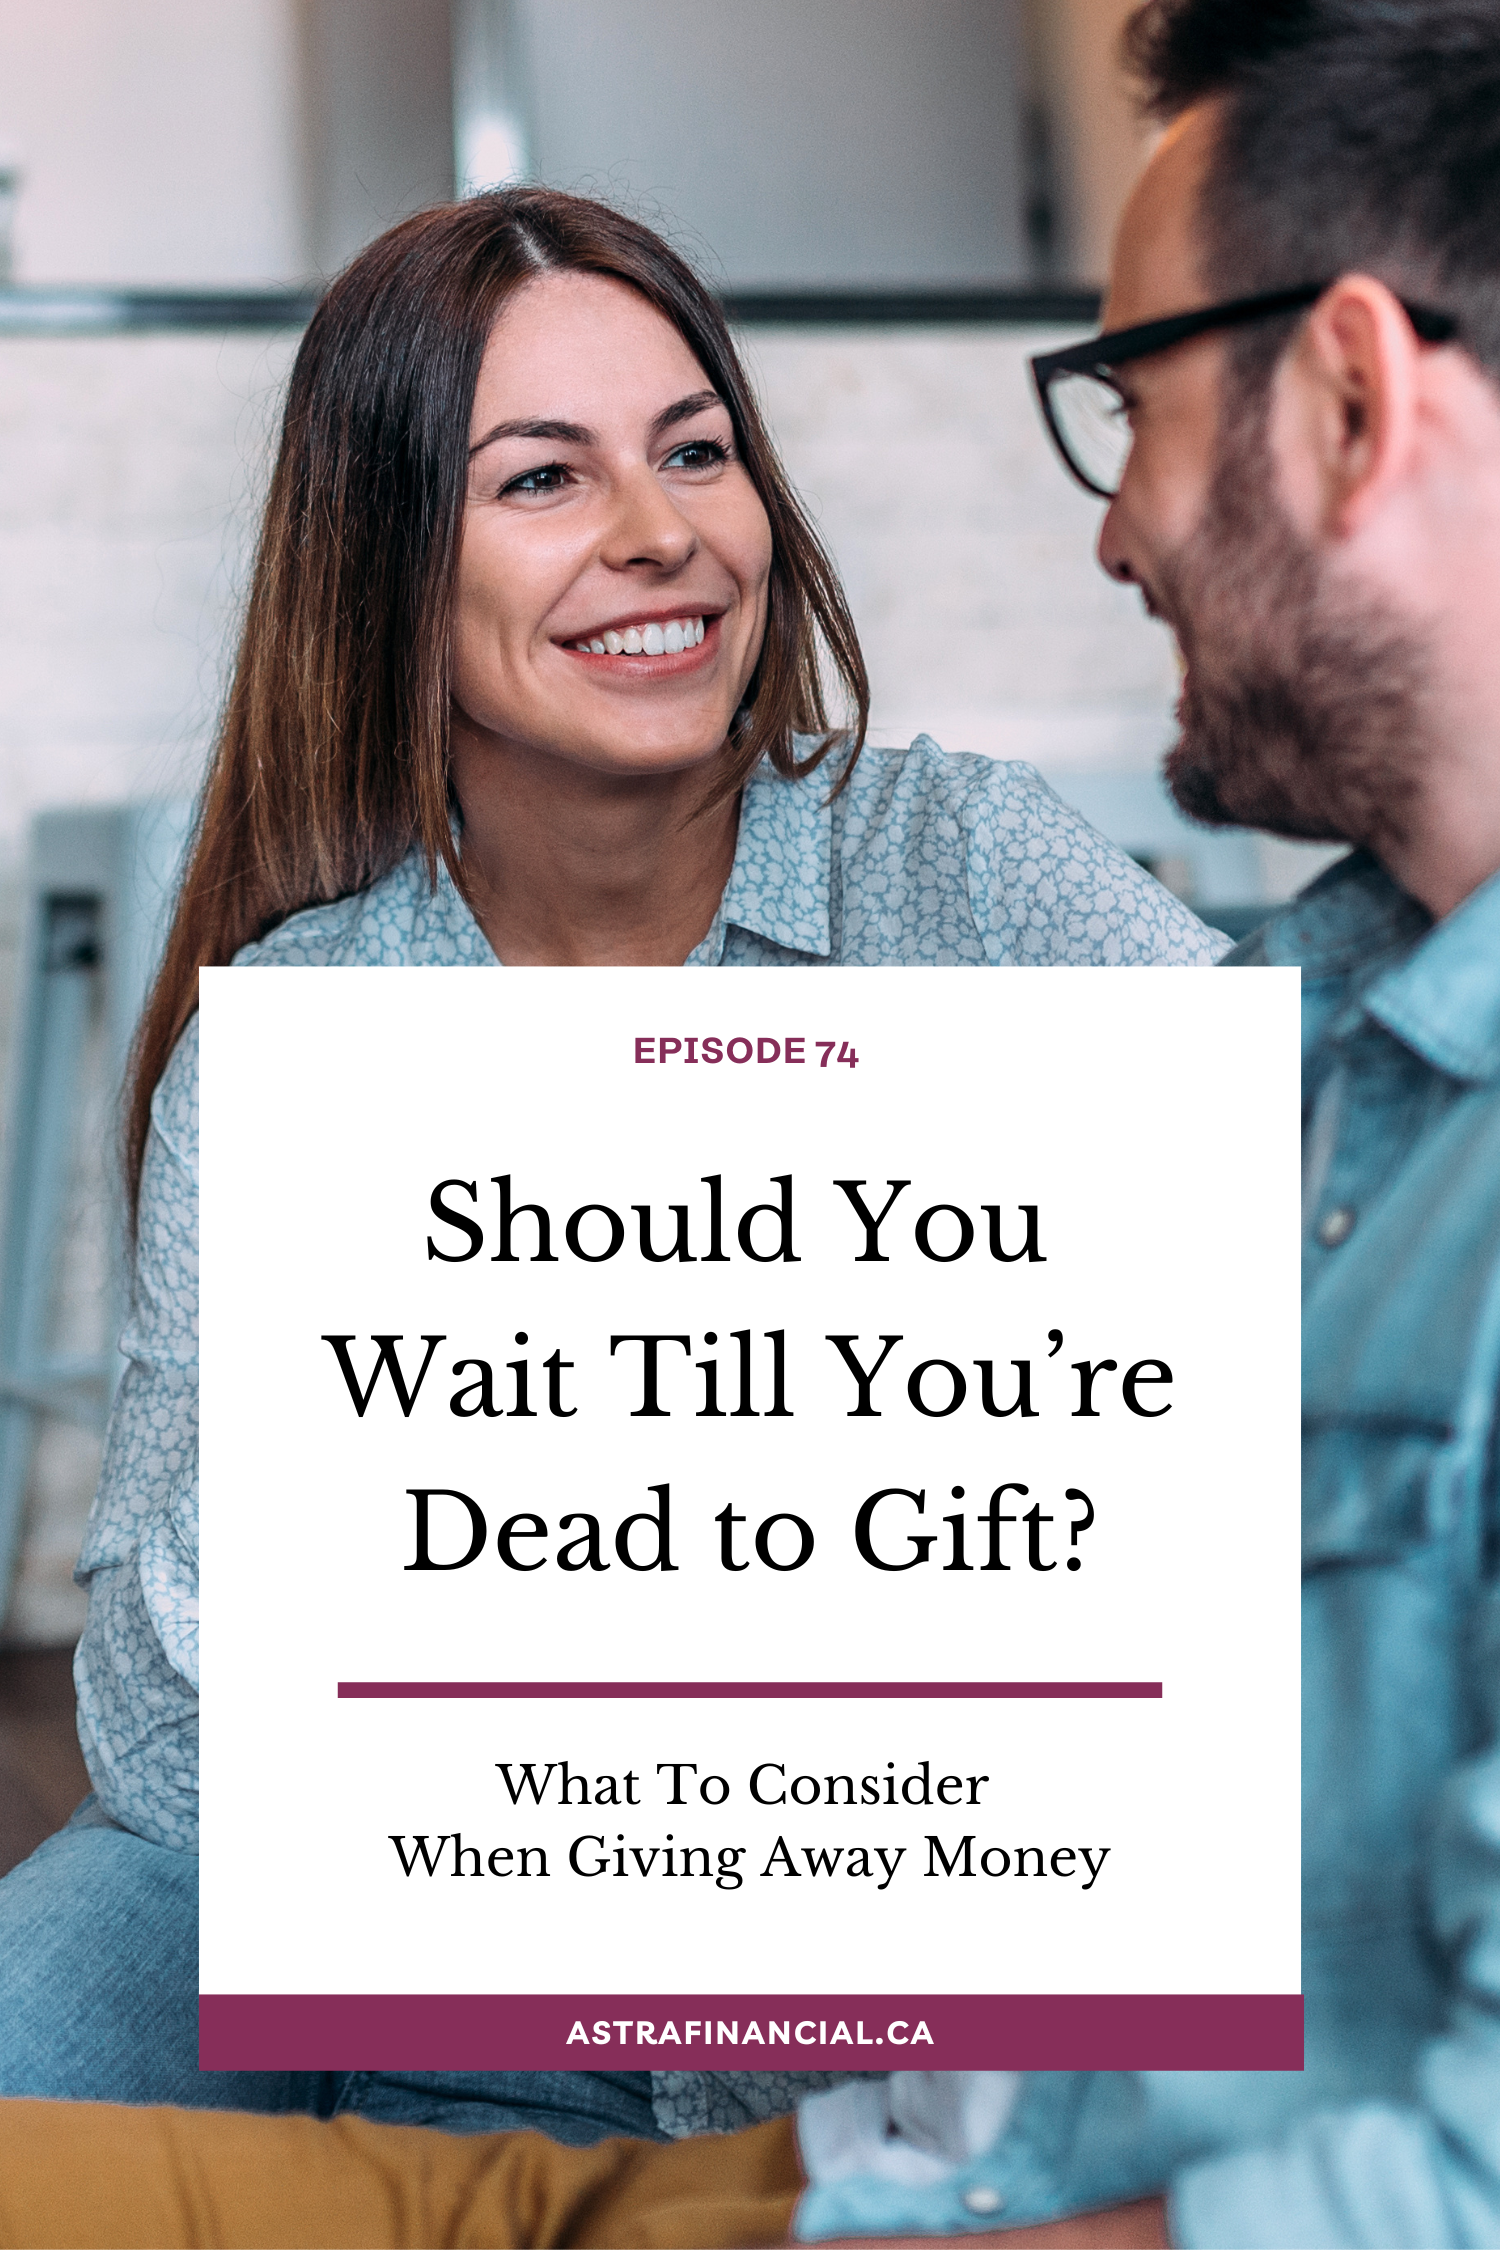 Should You Wait Till You’re Dead to Gift? by Astra Financial